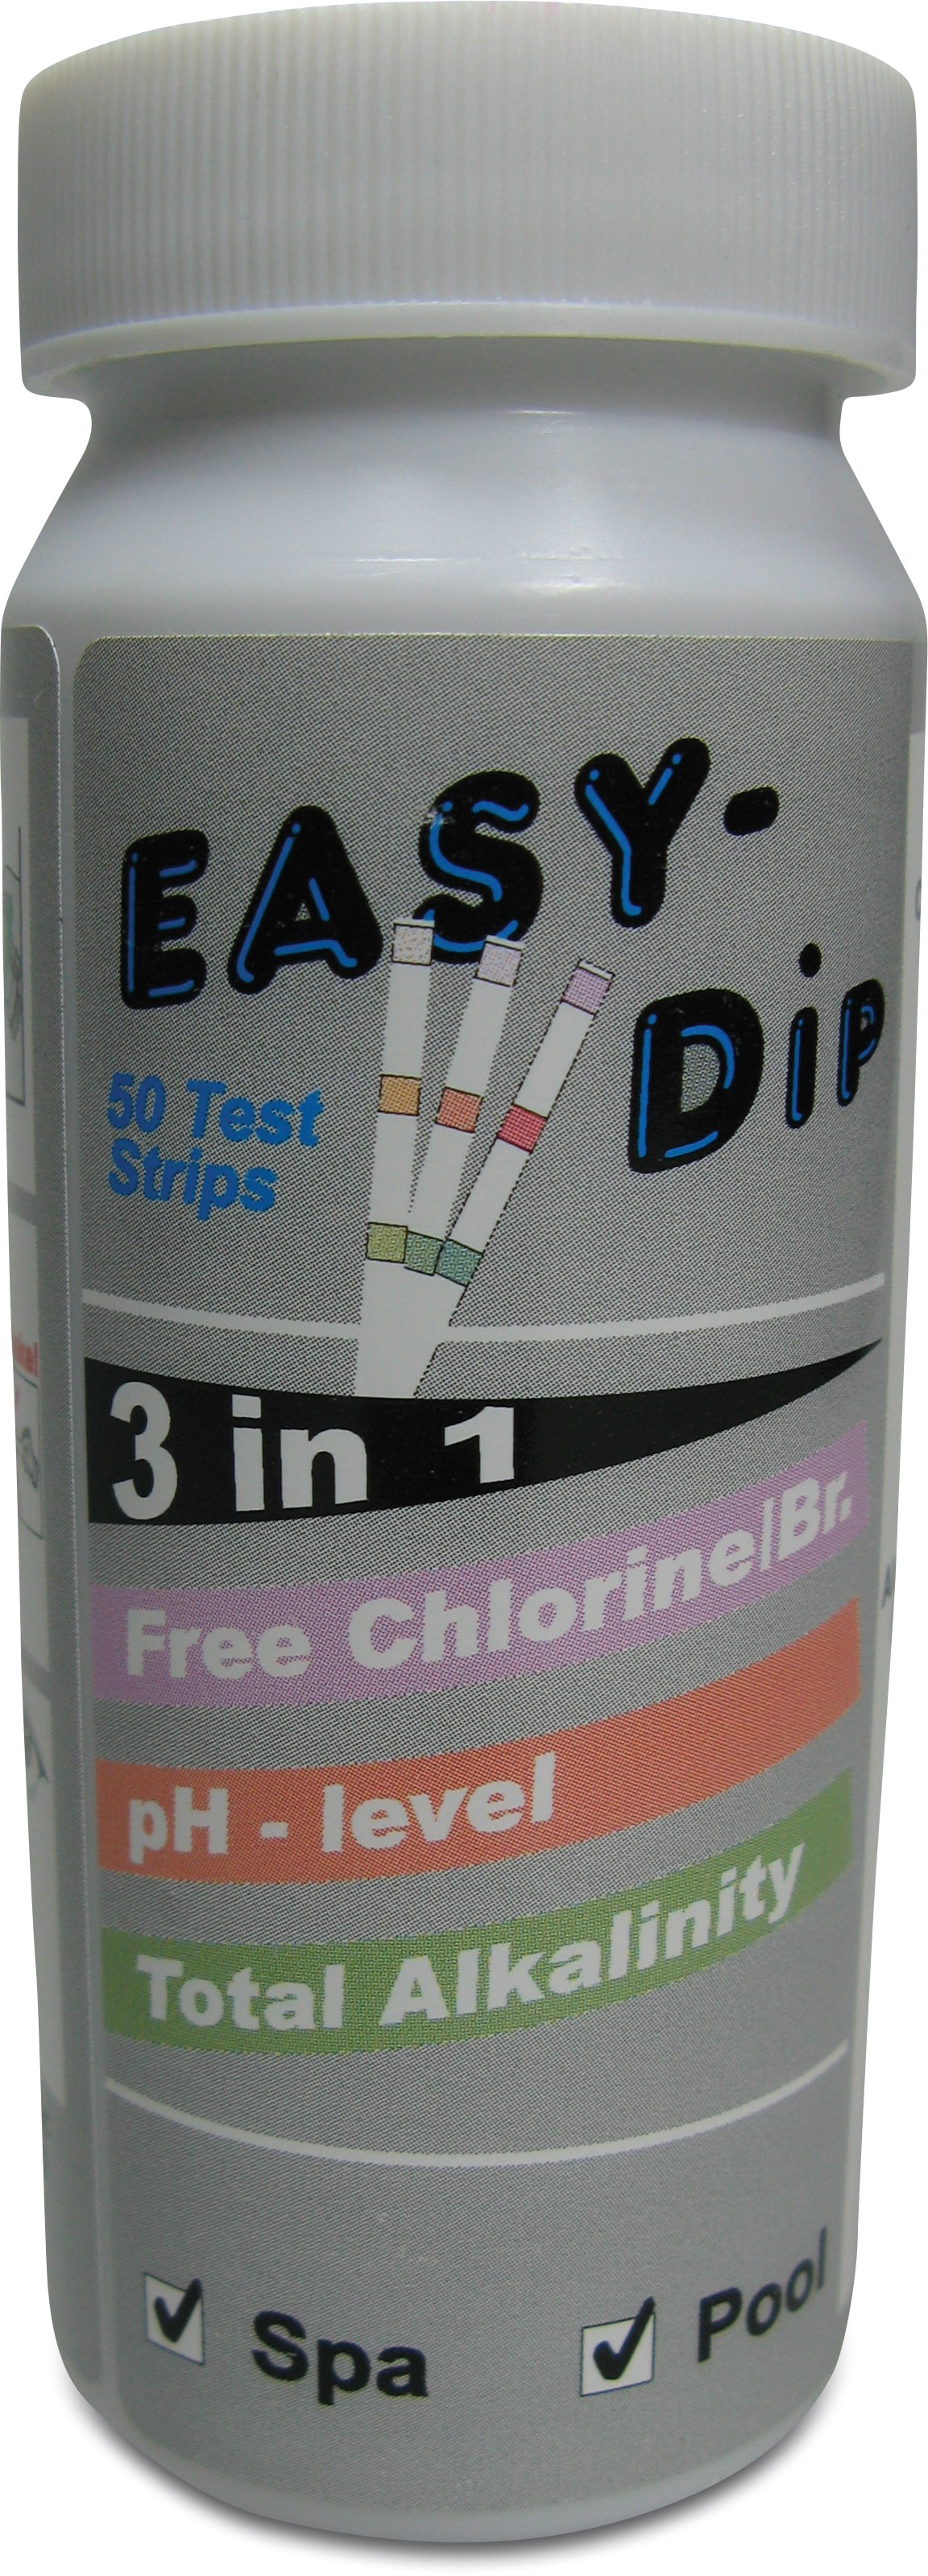 Pool-I.D. 3-in-1 test strips for the measurement of pH, free Chlorine, Bromine and Alkalinity values. 50 pcs